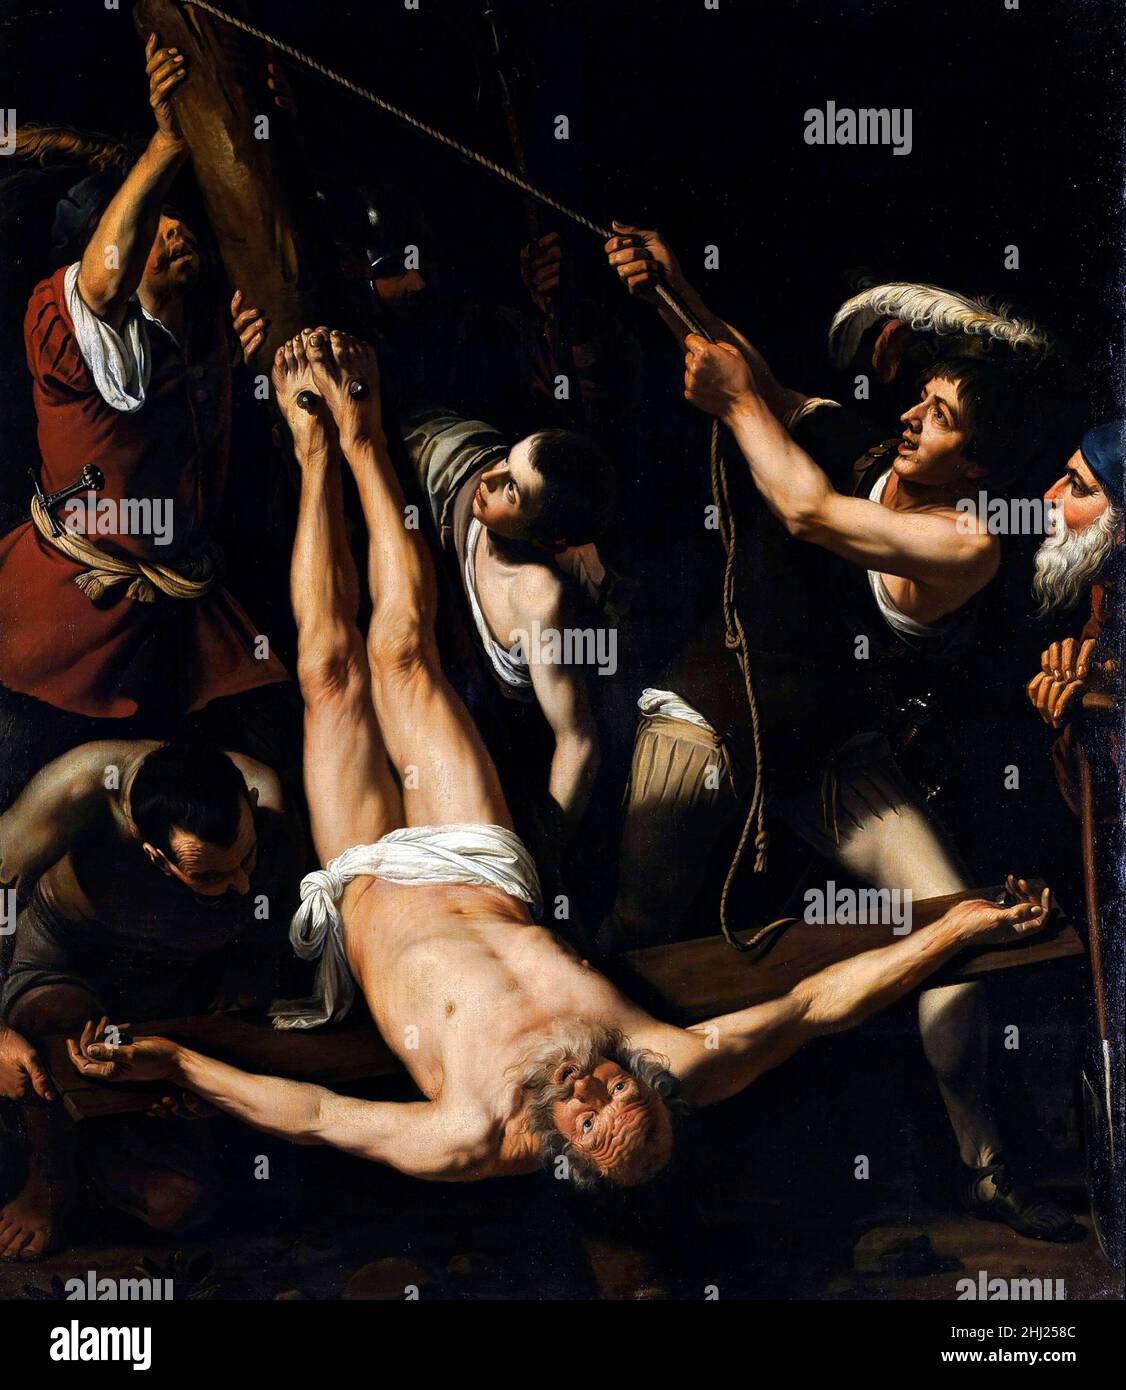 The Martyrdom of Saint Peter by the circle of Michelangelo Merisi da Caravaggio (1571-1610), oil on canvas, Stock Photo